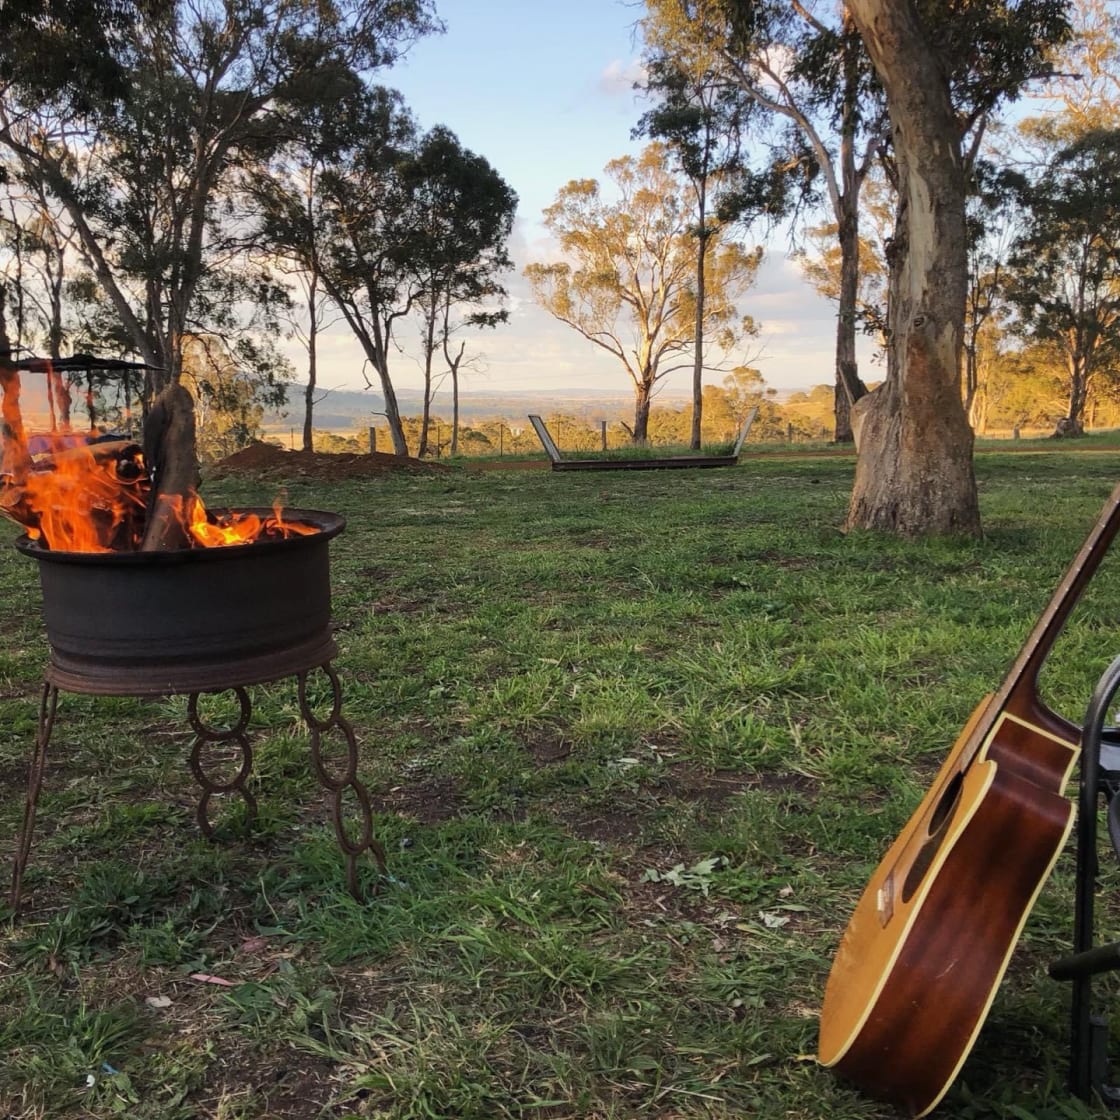 Campsite with a view. Fires welcome - local fire restrictions apply during High Fire Danger periods